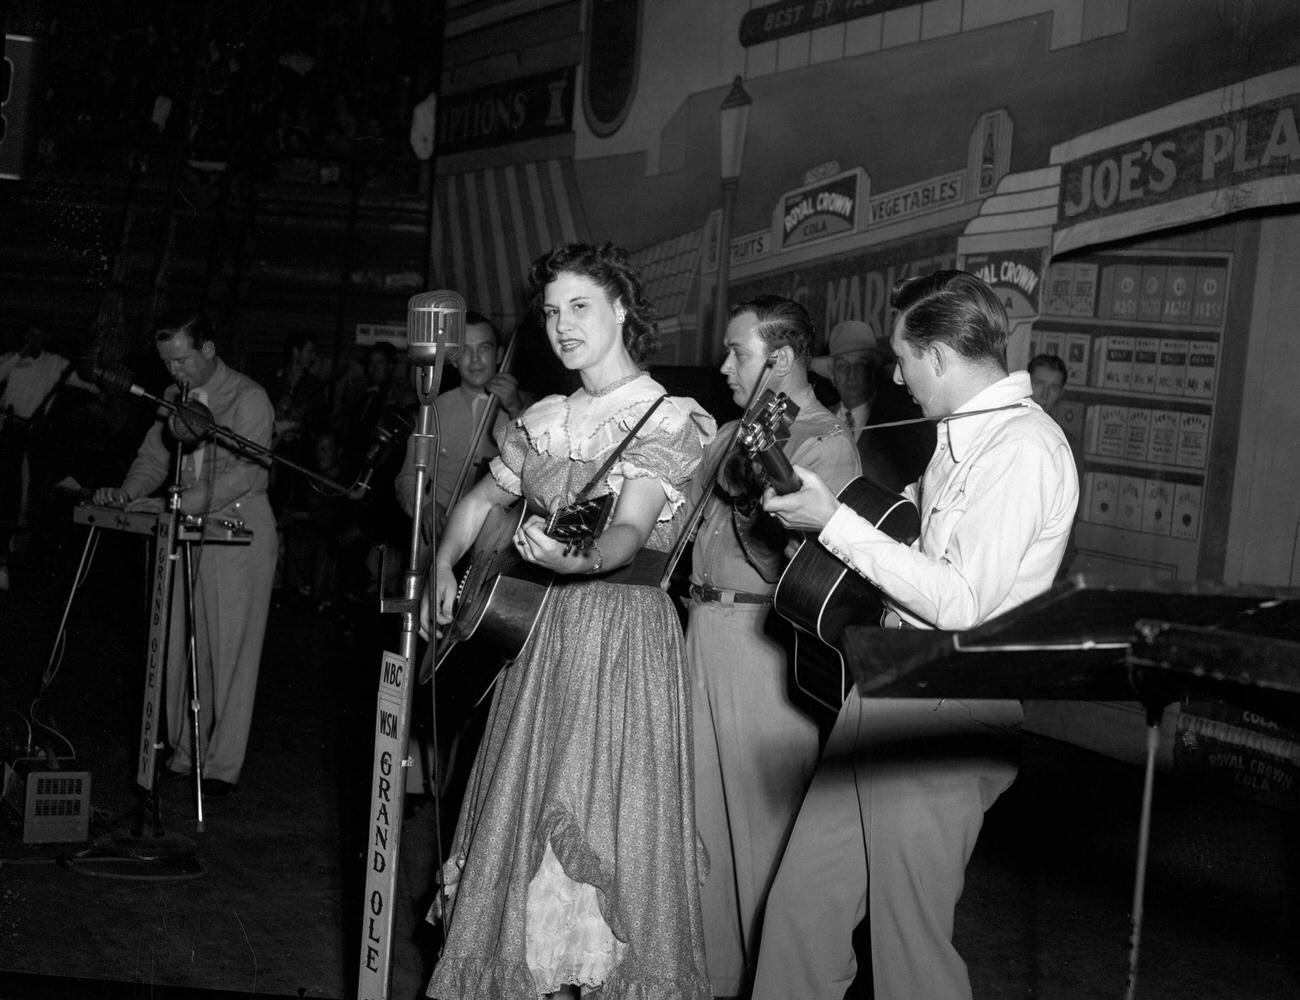 Country singer Kitty Wells performing at the Grand Ole Opry, circa 1950, Nashville, Tennessee.